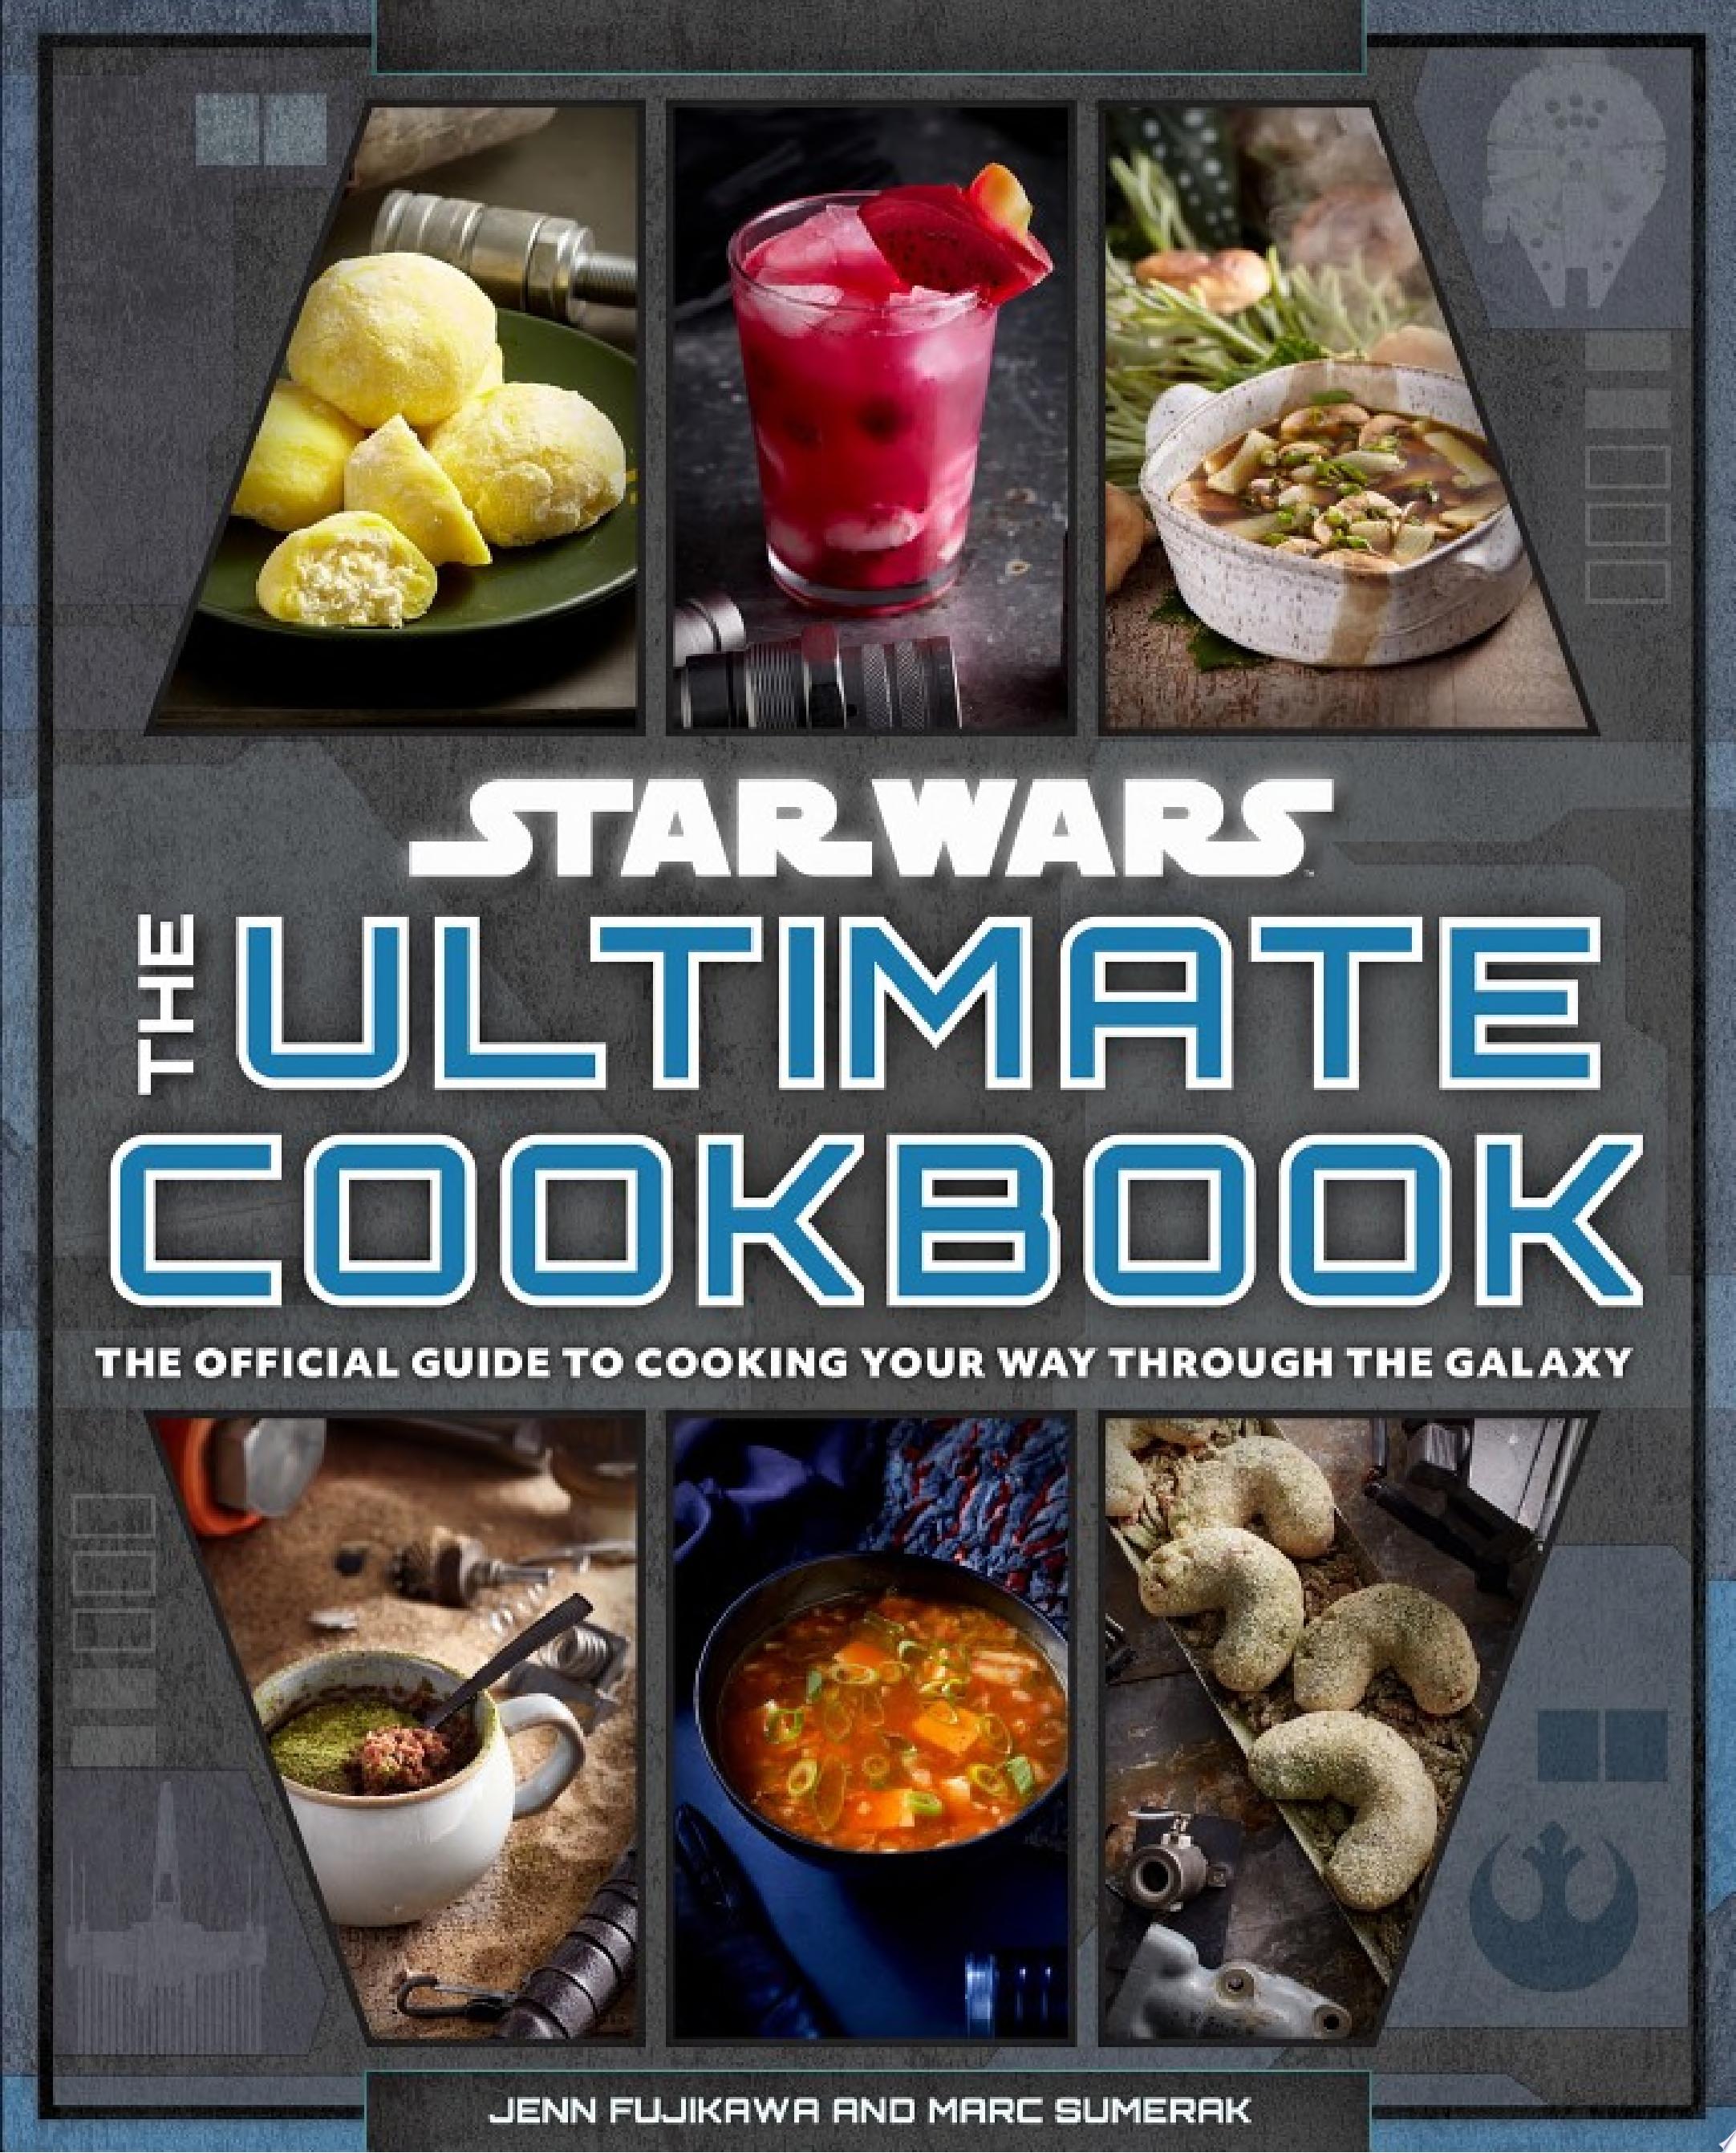 Image for "Star Wars: The Ultimate Cookbook"